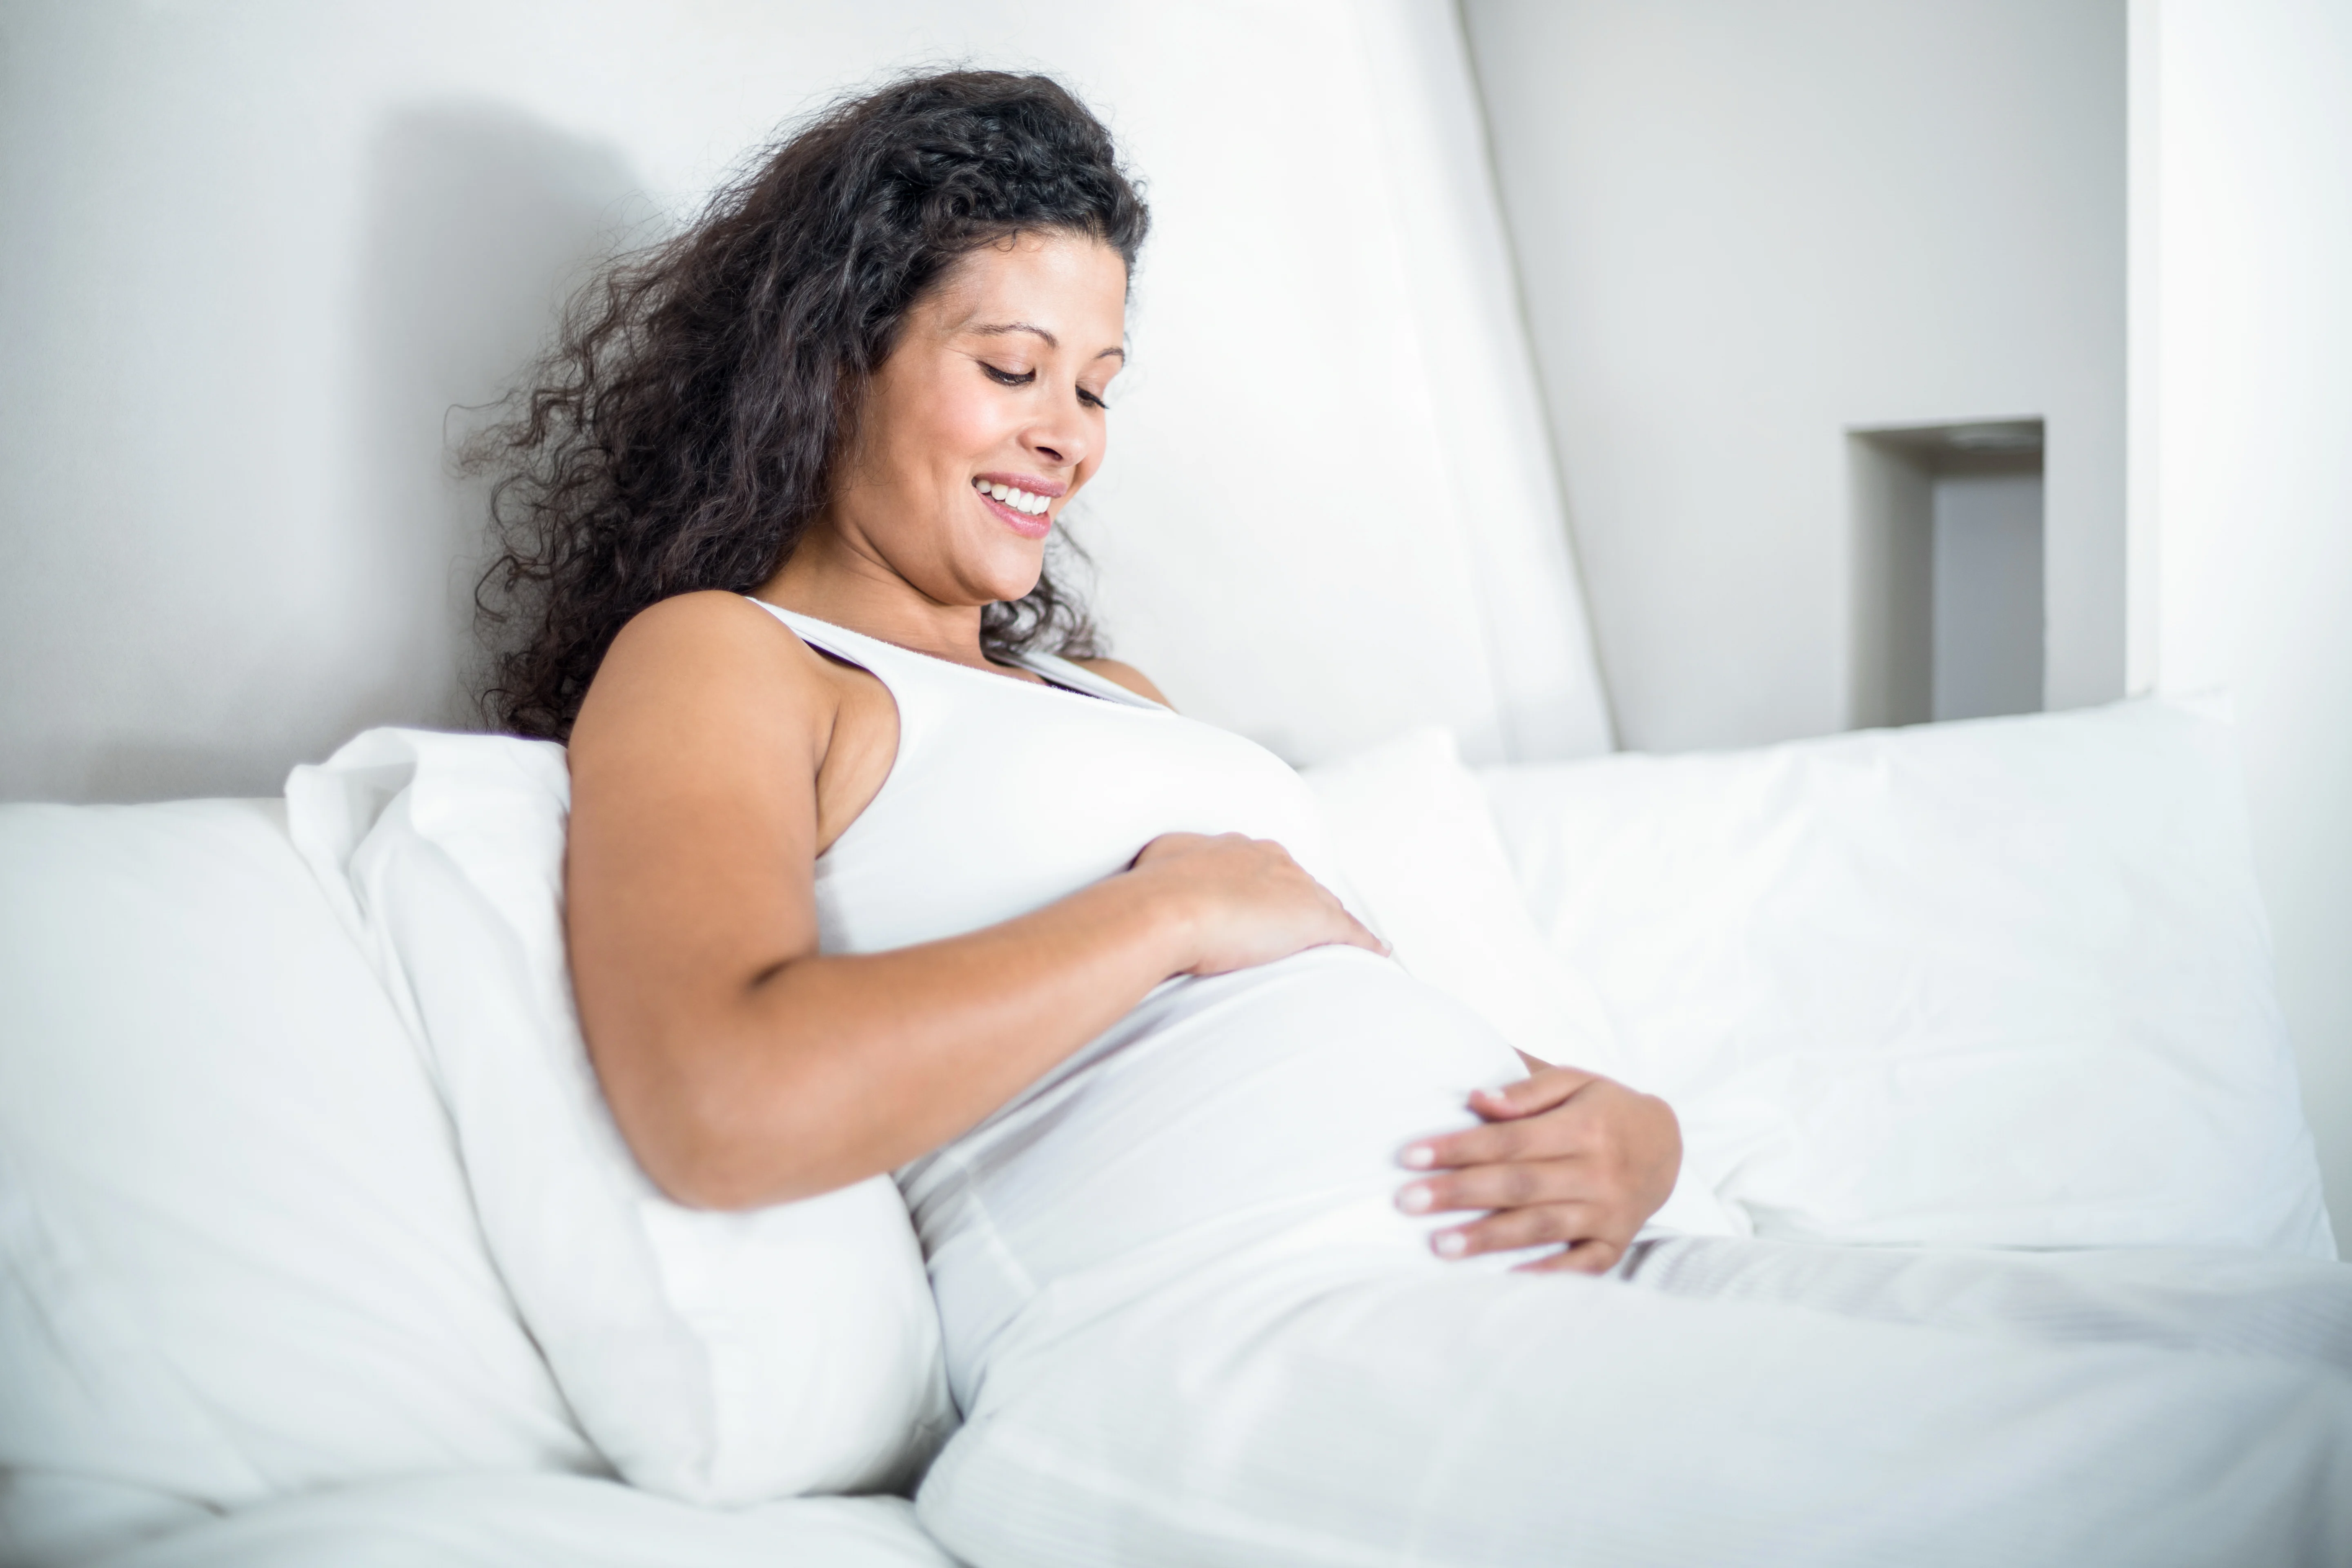 Pregnancy discharge: what vaginal discharge means during pregnancy